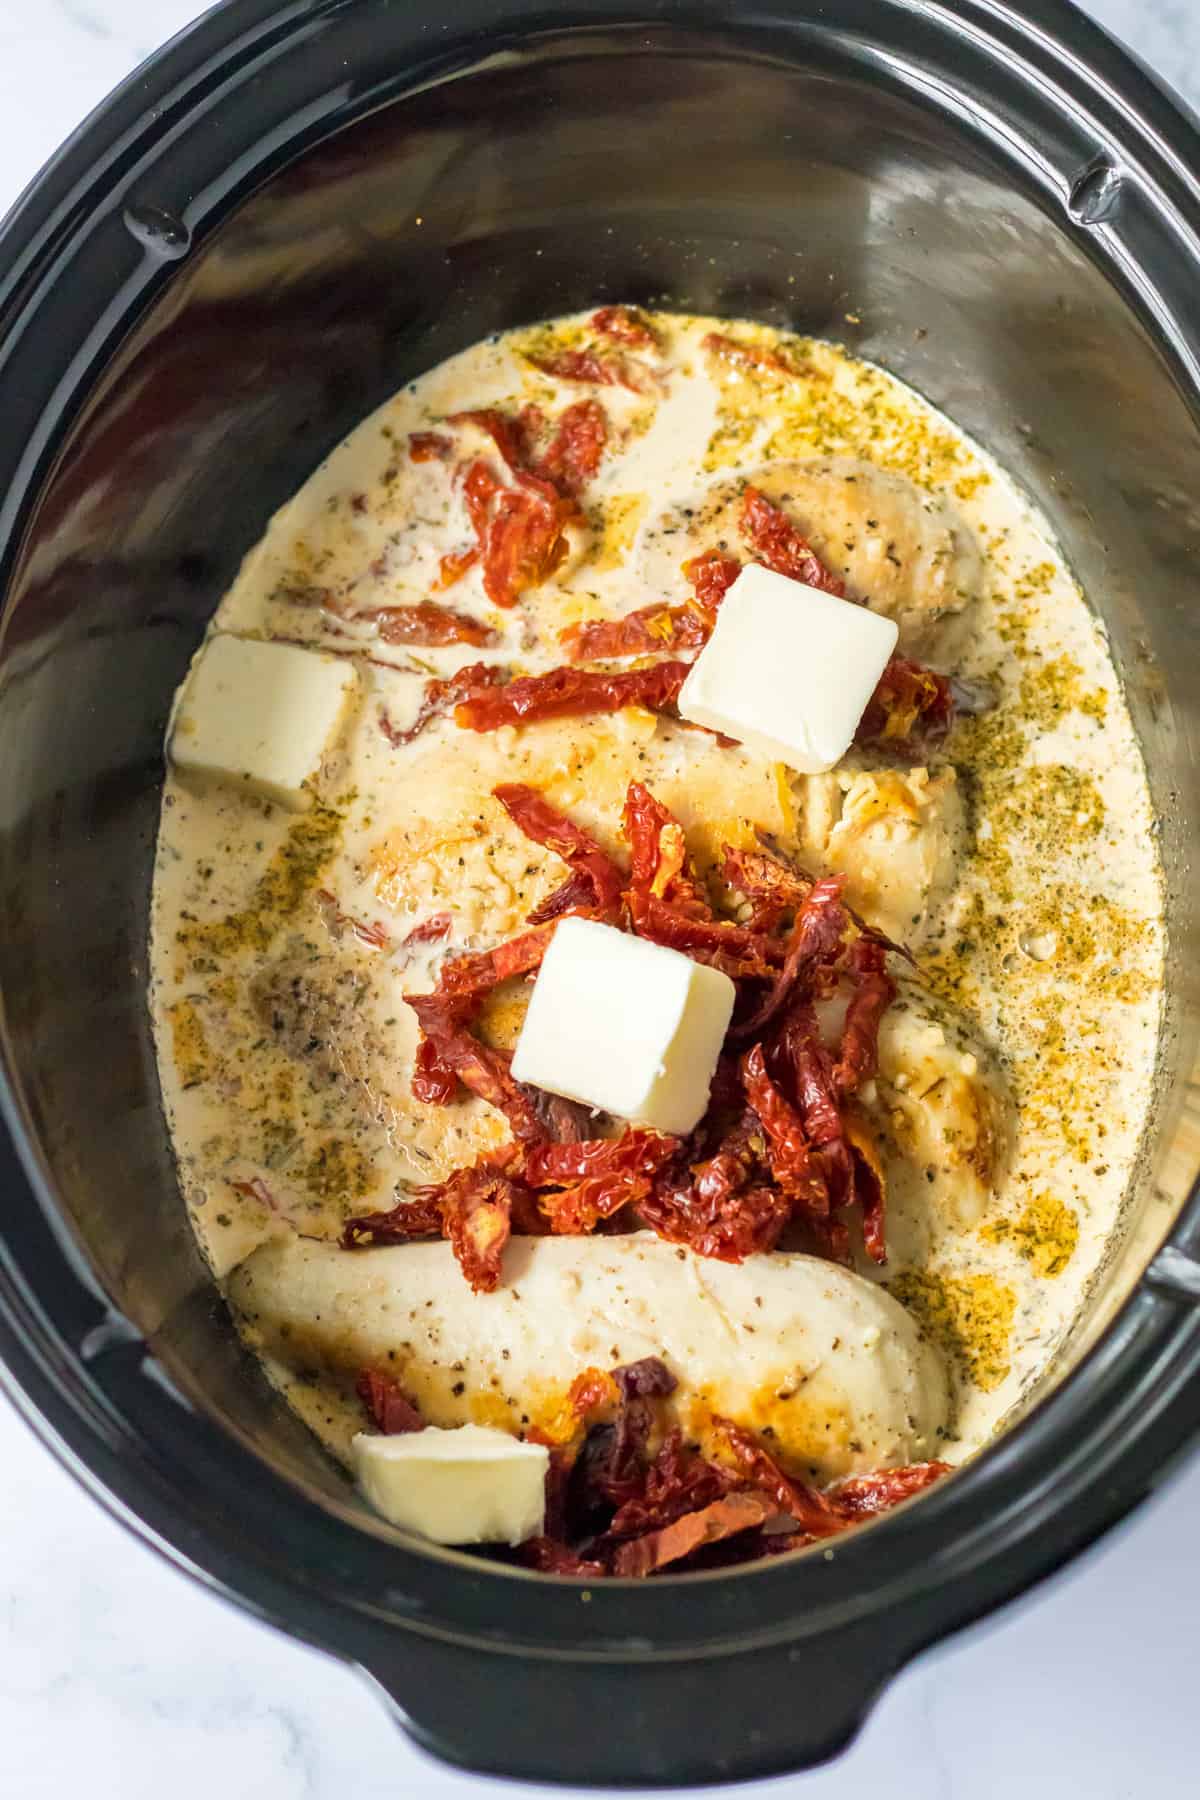 Chicken breasts with cream sauce, sun dried tomatoes, and butter in the crockpot.